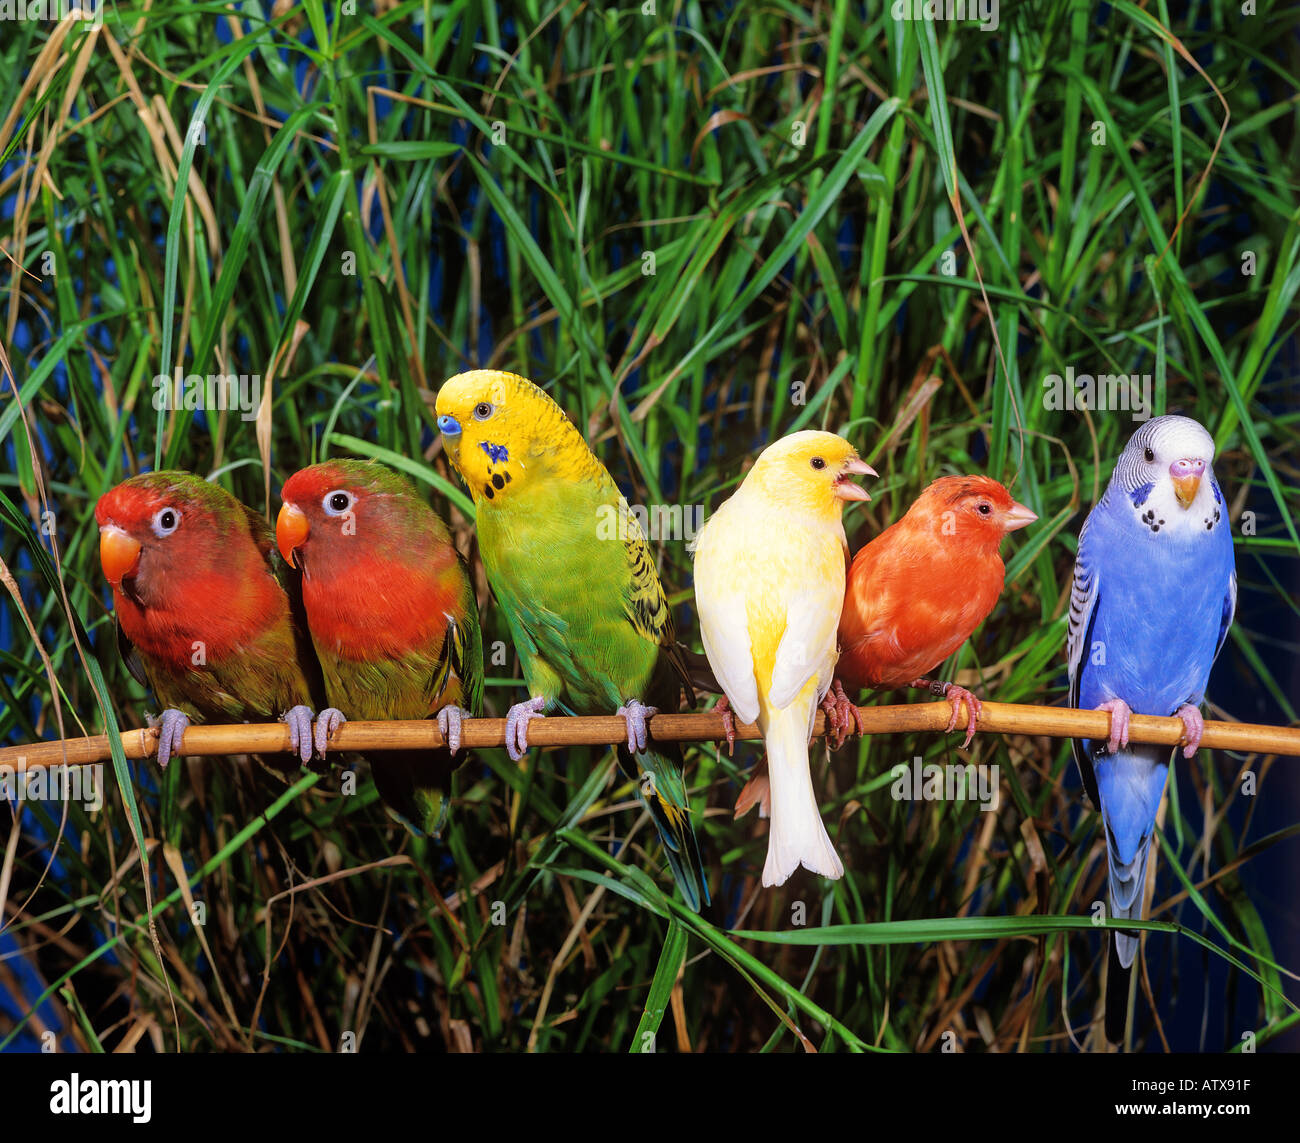 Two Fischers Lovebirds (Agapornis fischeri), two budgerigars and two canaries of different colours sitting on a twig Stock Photo